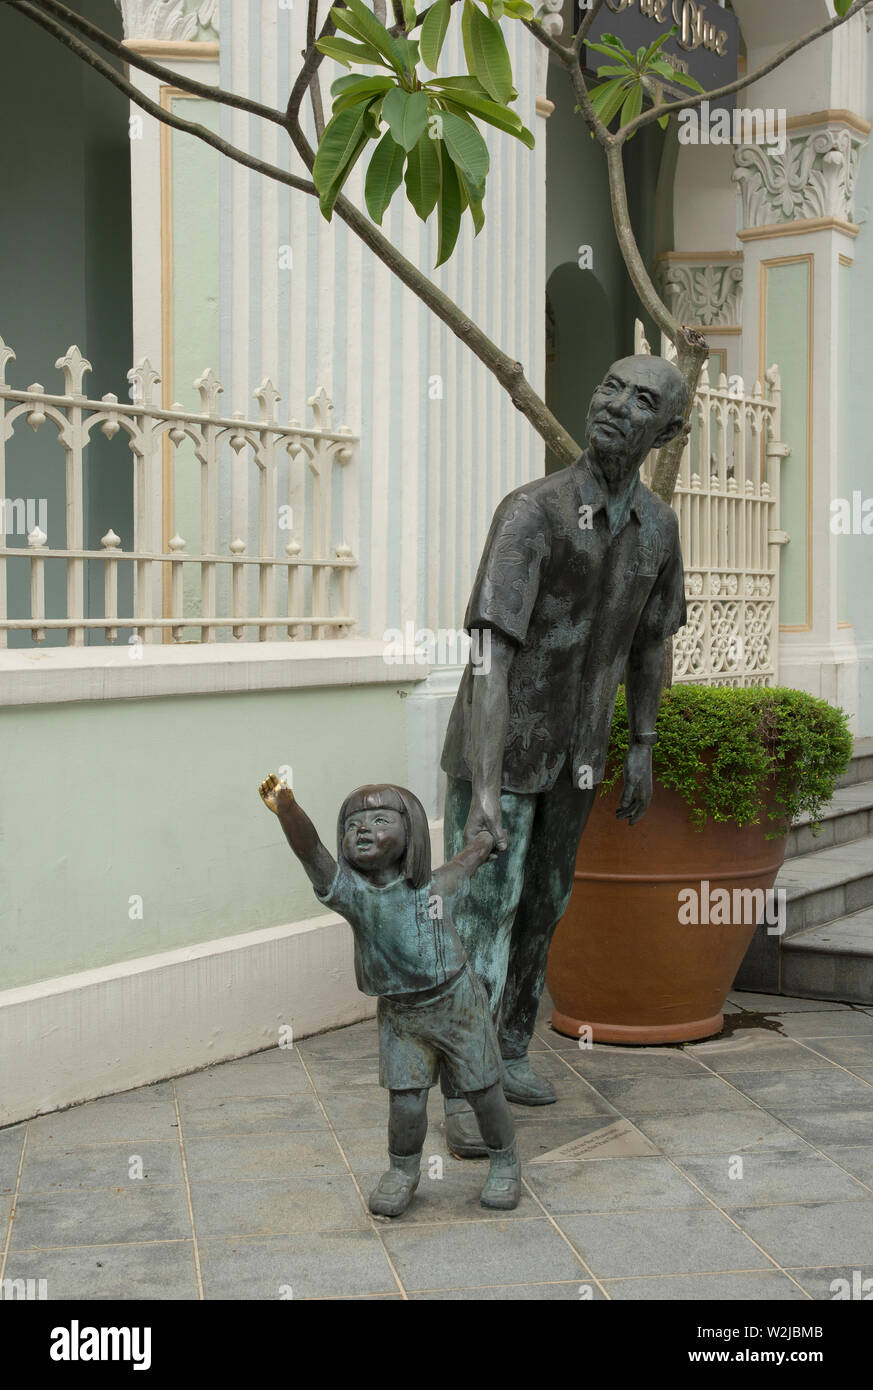 singapore, singapore - february 09, 2017: bronze statues of an old man and a young girl in front of the peranakan museum on armenian street Stock Photo